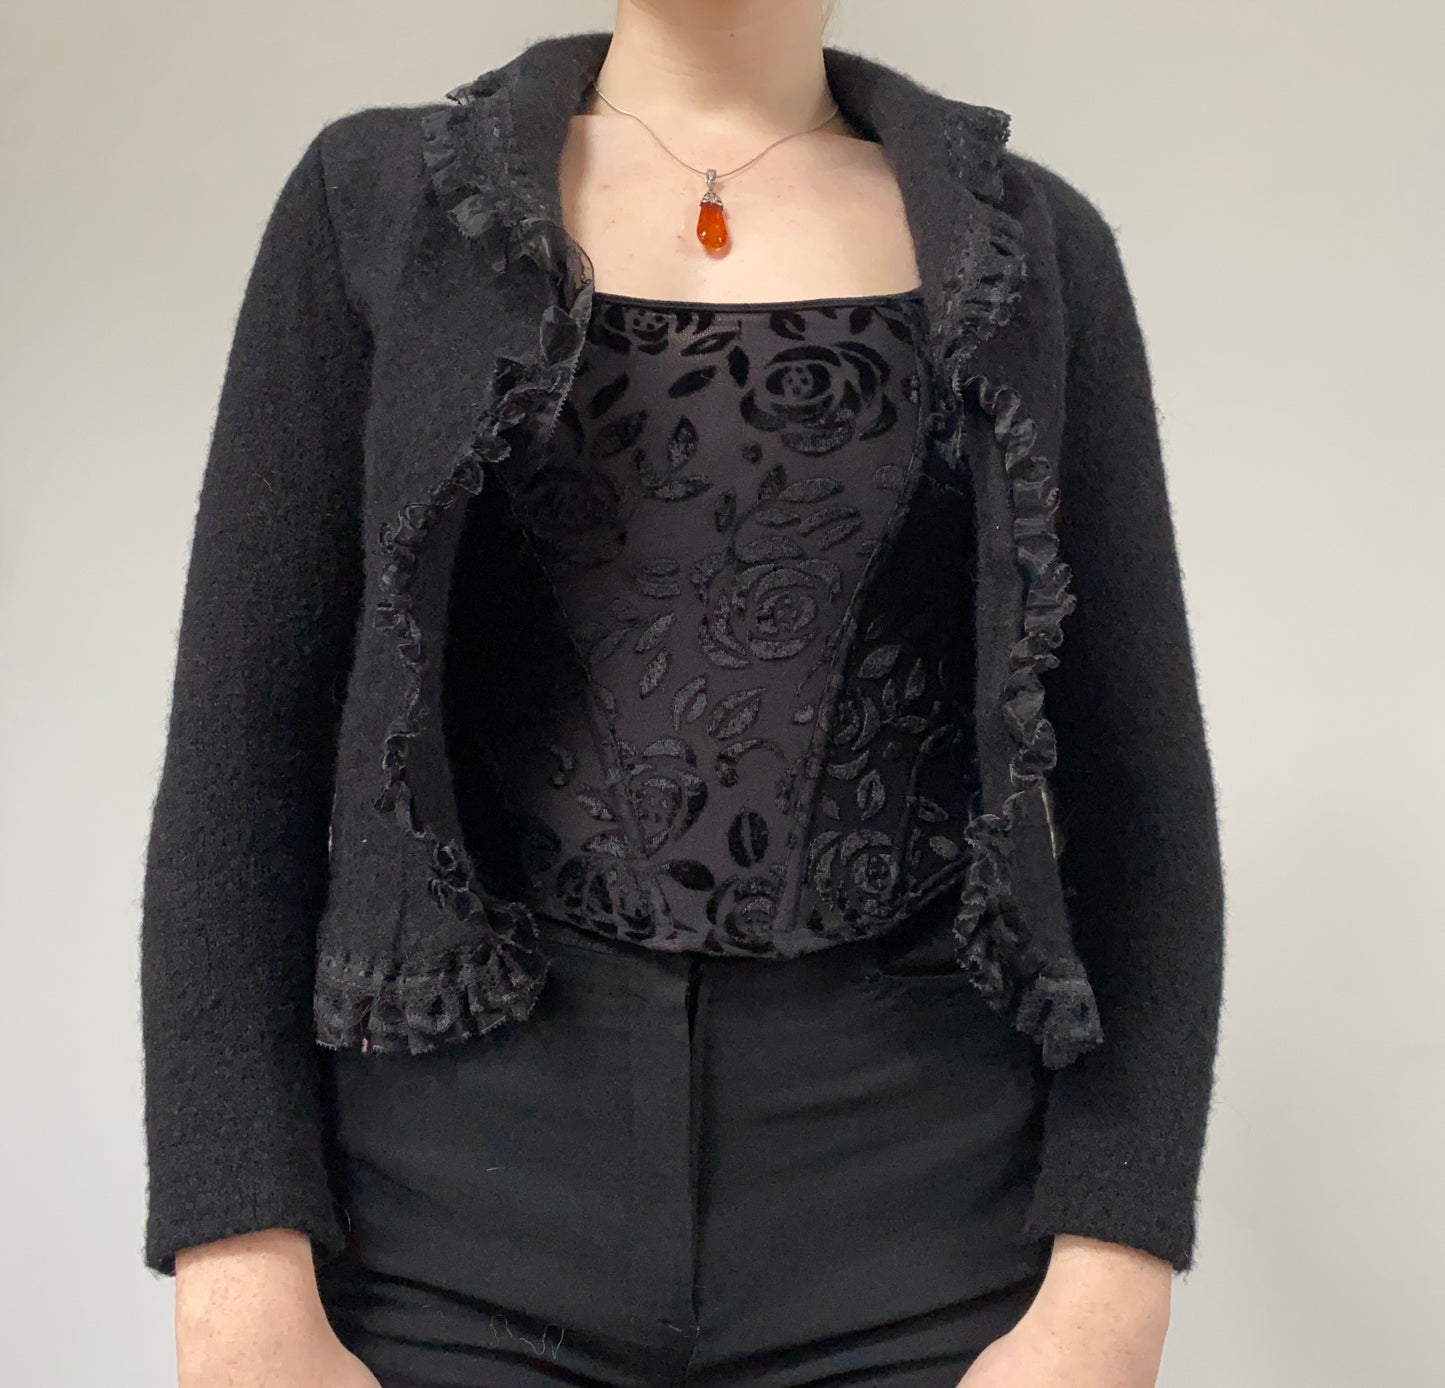 Witchy cardigan - size M